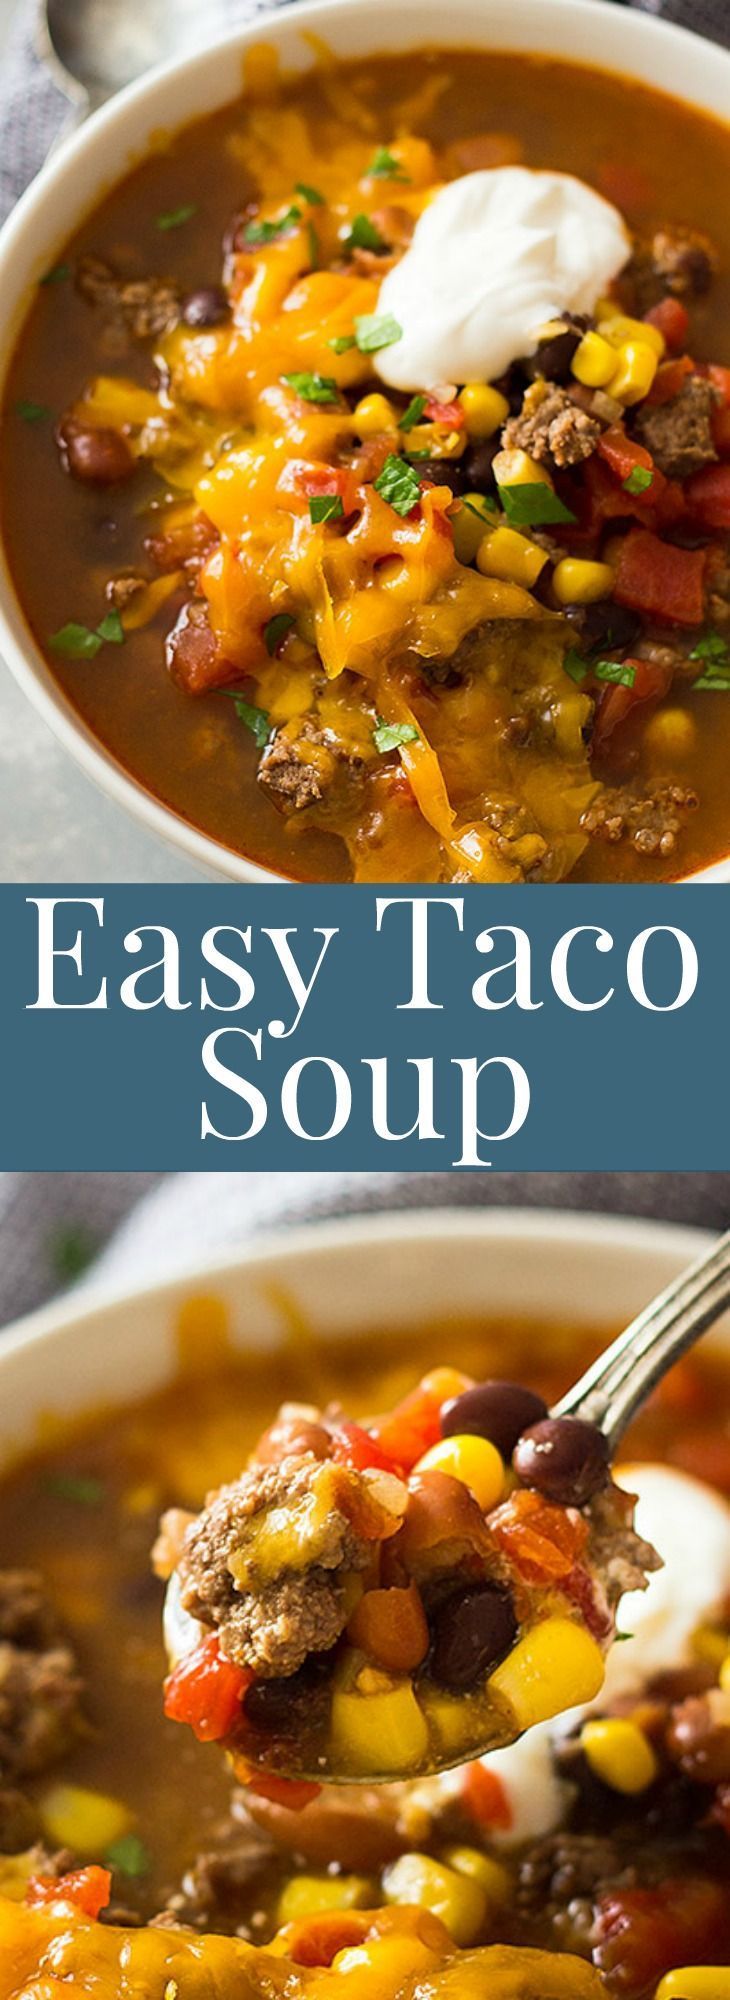 This Easy Taco Soup is packed with flavor, takes less than 30 minutes to make and there is a slow cooker version! |